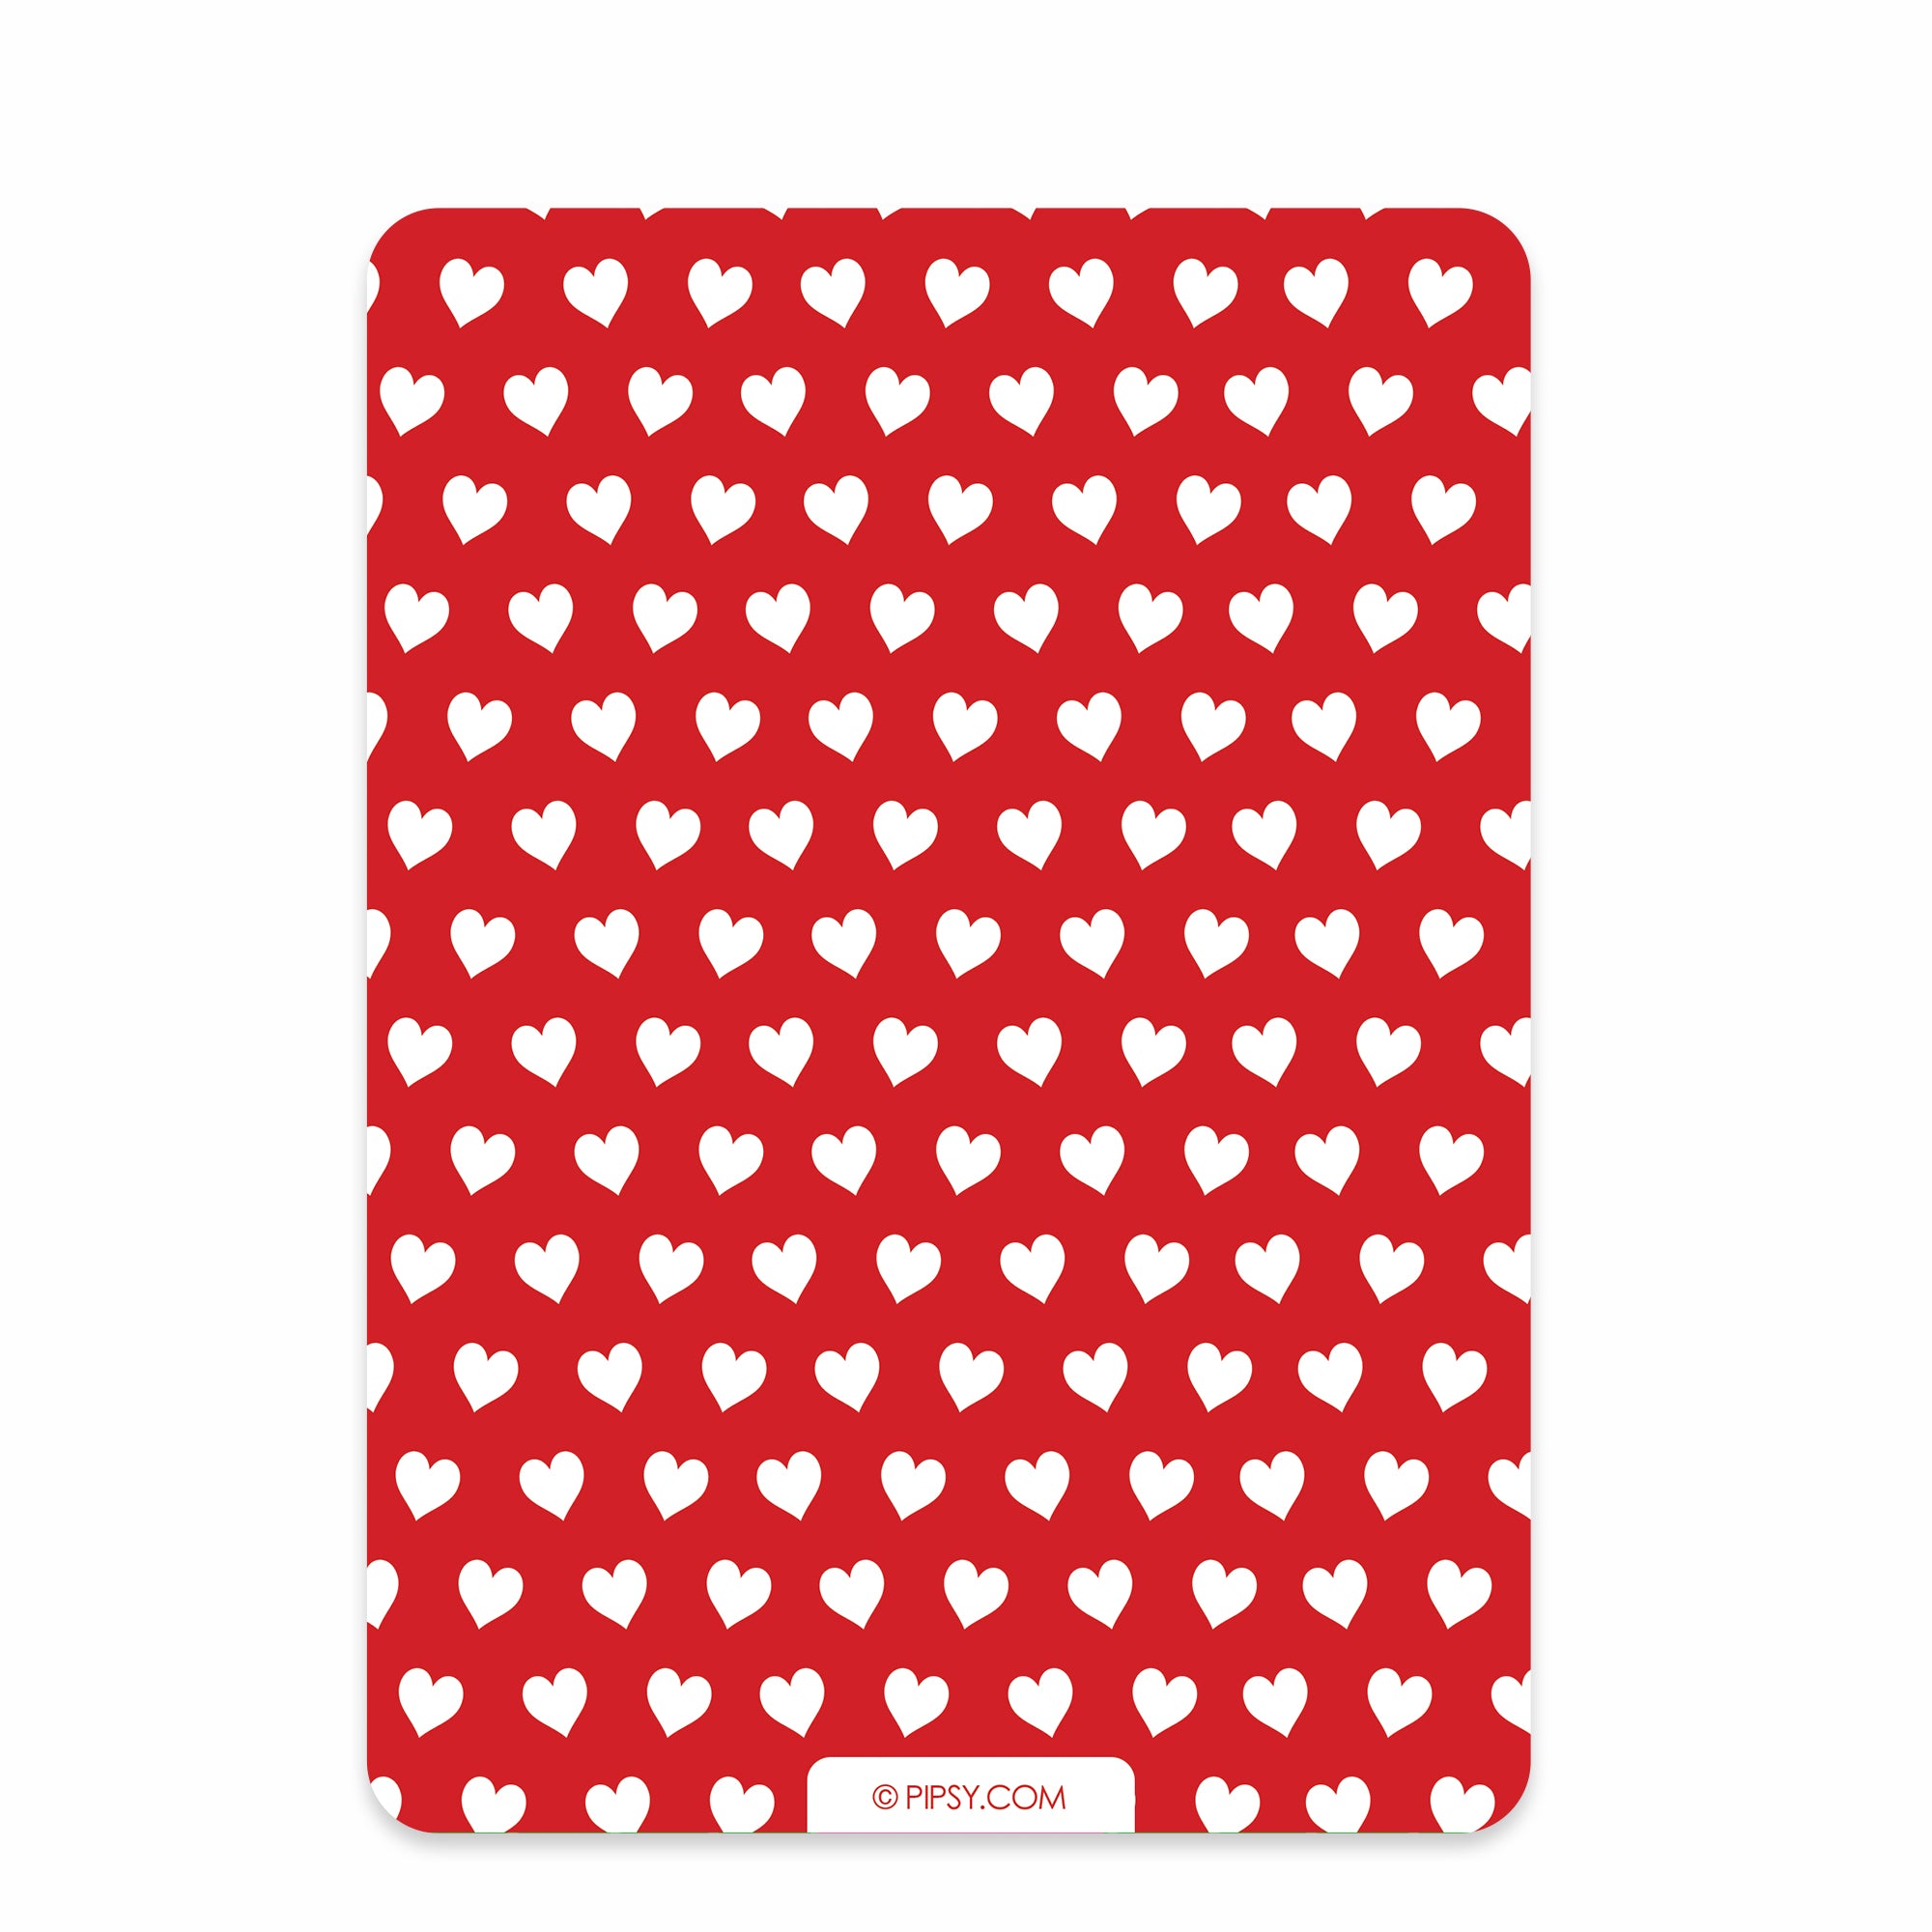 Valentine's Day Party Invitation, Elephant with Red Hearts, Printed on Heavy Cardstock, from Pipsy.com, back